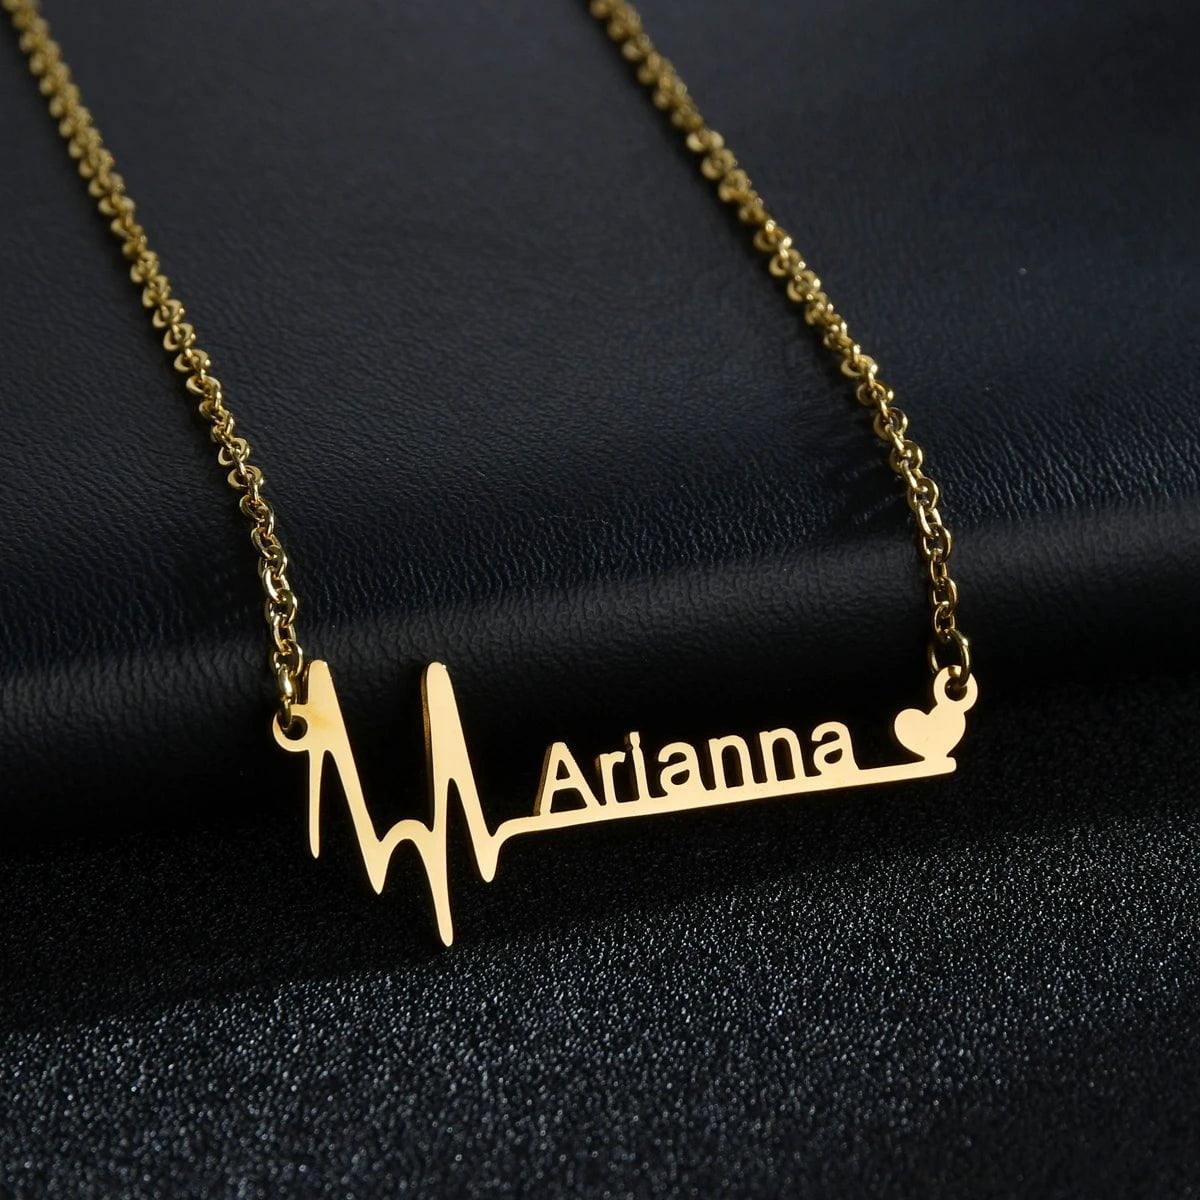 Custom Heartbeat Name Necklace - Stainless Steel Birth Date Pendants with Personalized Letter heartbeat 1 / silver color / 35cm